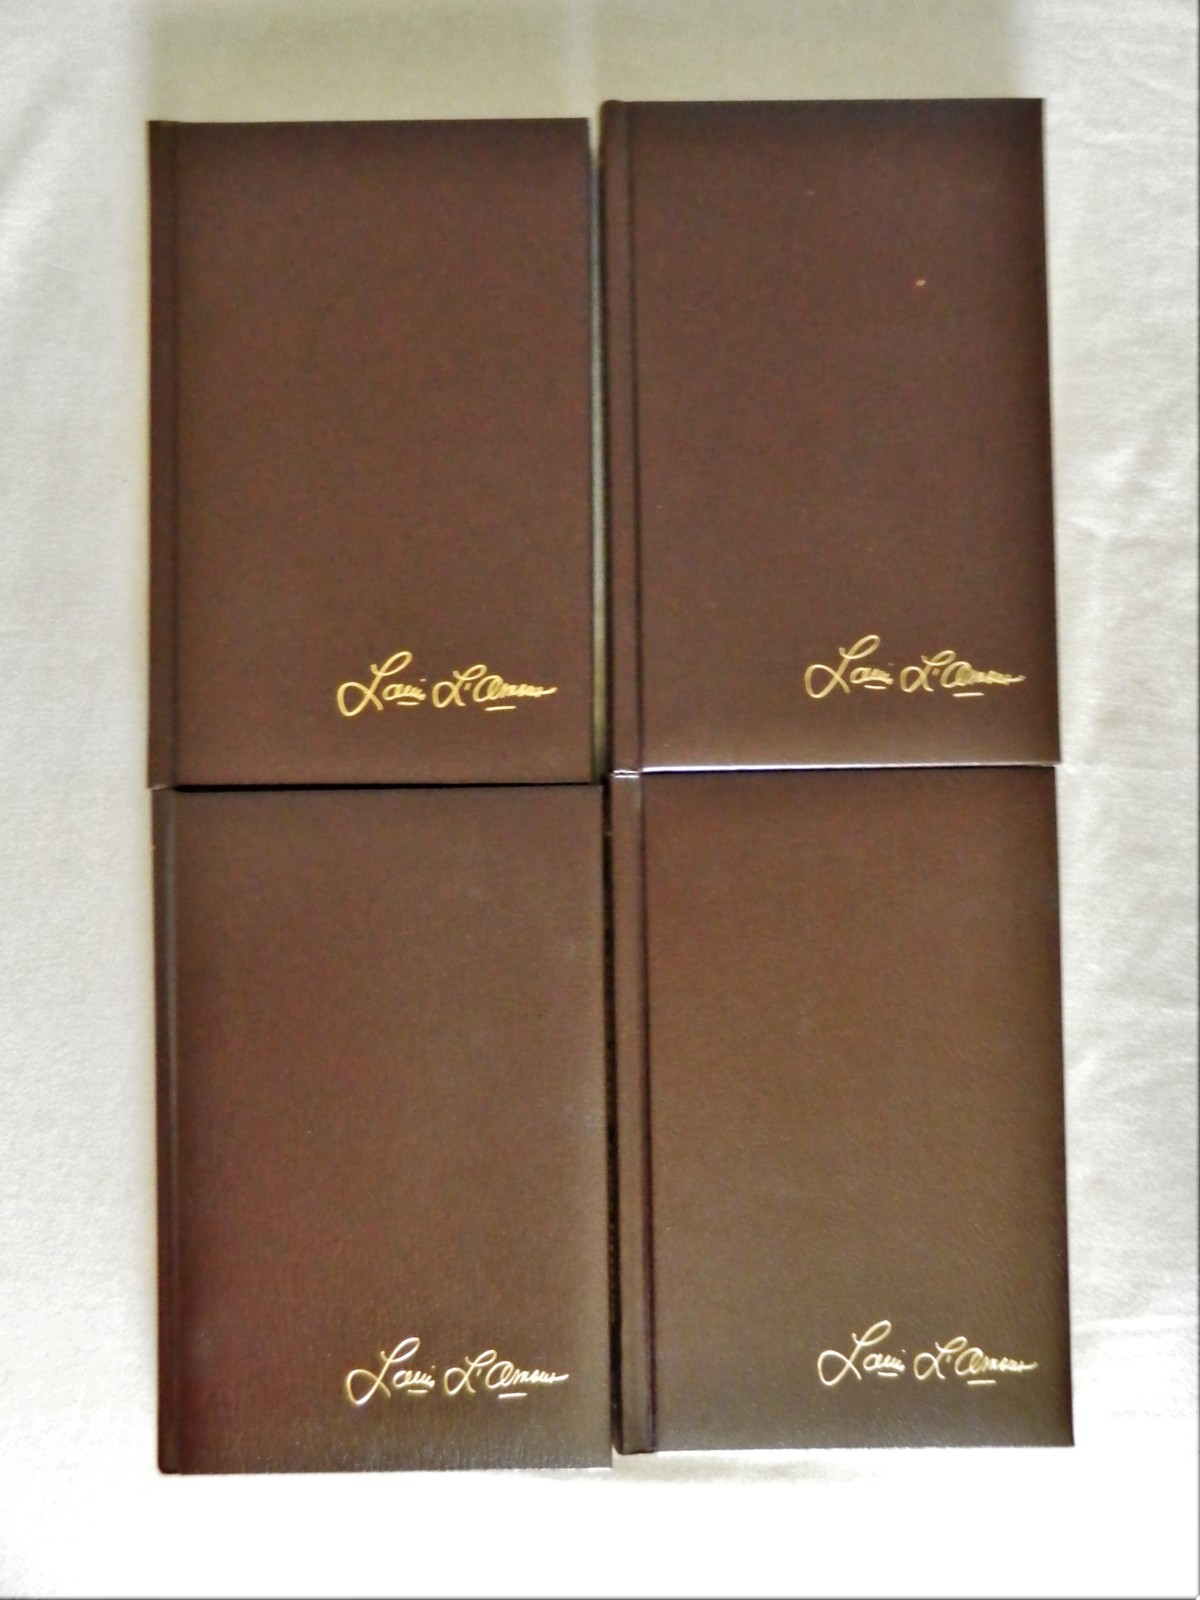 Sackett Series By Louis L’amour – 11 Leatherette/ Hard Cover Books ...